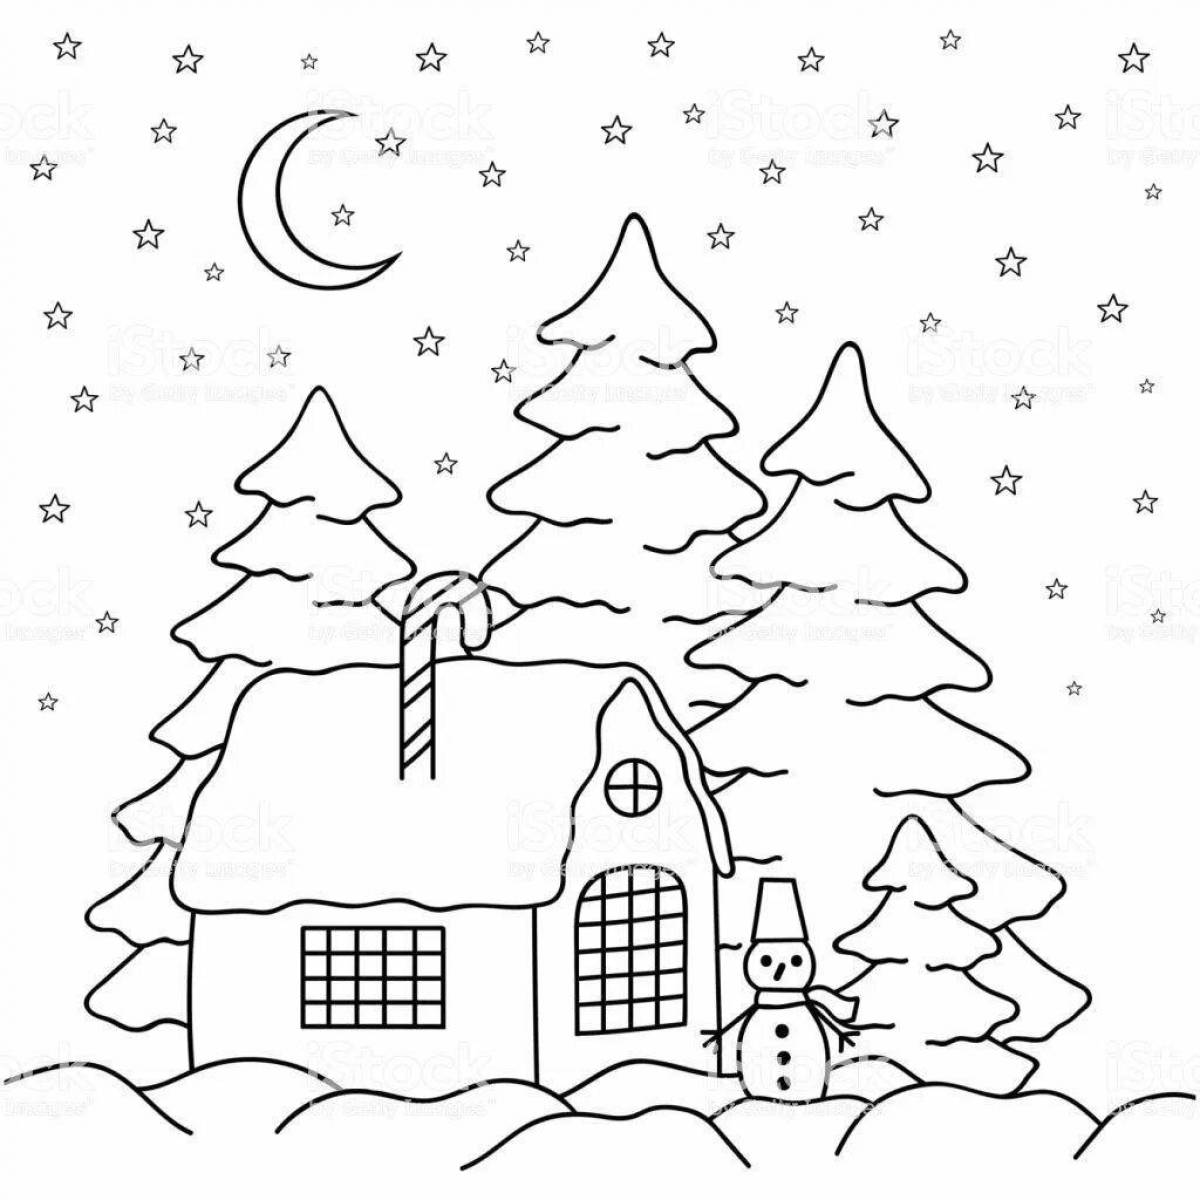 Coloring page wonderful winter nature